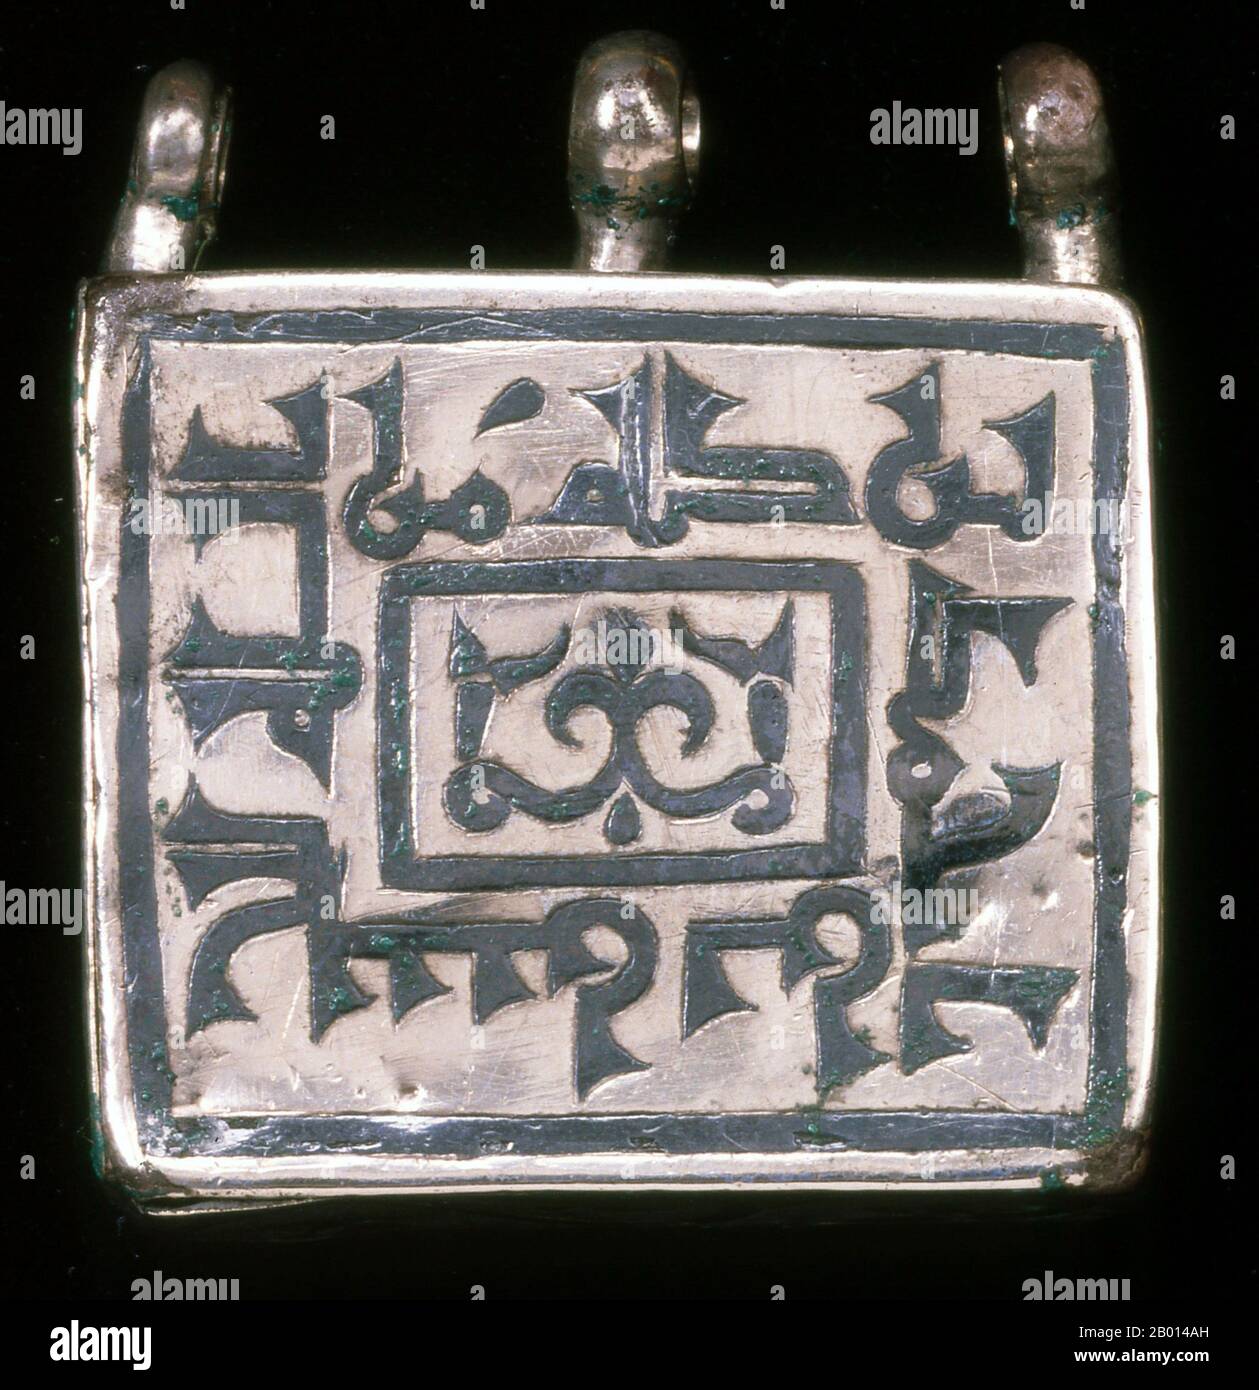 Iran: A ta'wiz or amulet case in silver and nielloware, used for carrying a short verse from the Qur'an for protection and good luck. The Arabic inscription on the face is the shahada or Muslim profession of faith in Kufic script, 10th-11th century.  Ta'wiz or Tawiz are lockets usually containing verses from the Quran or other Islamic prayers and symbols. As a general rule it is worn with the belief that it will repel any evil intended for the wearer and will also bring him luck. As such it is intended to be an amulet. The word Ta'wiz is also used to refer to other amulets used in Islam. Stock Photo